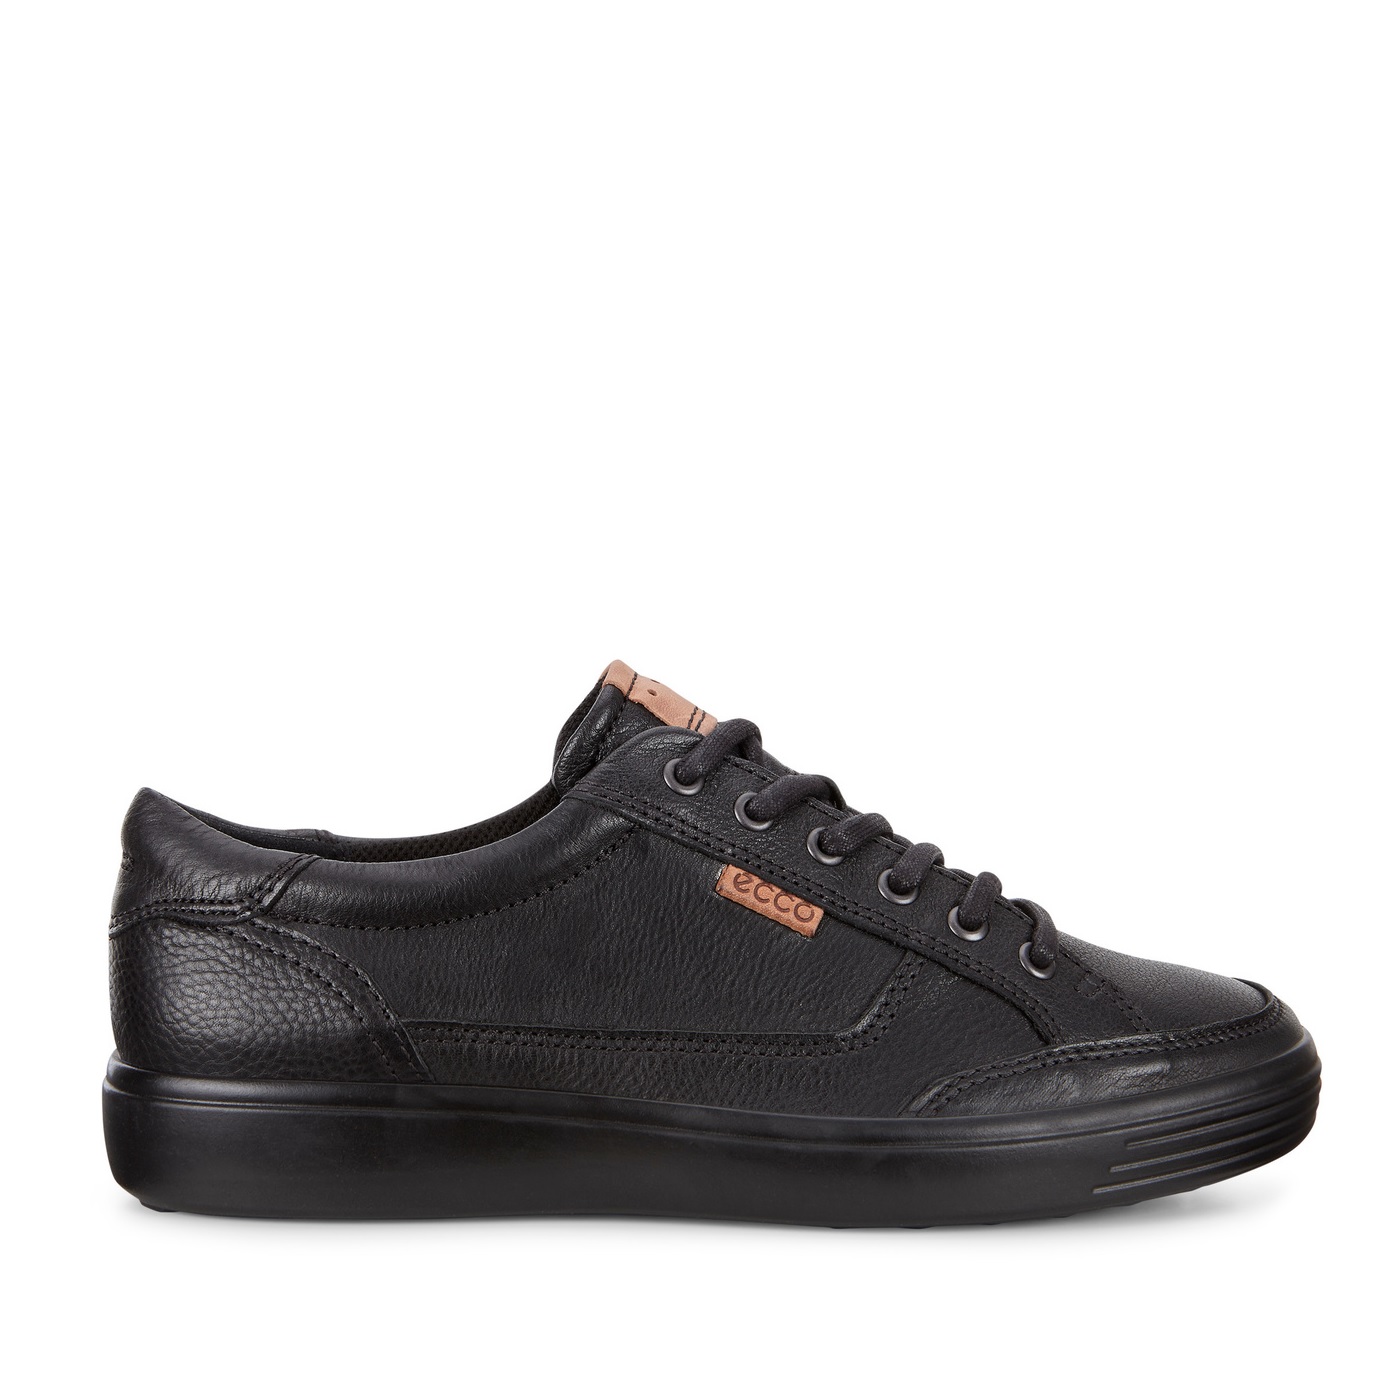 Ecco Mens Soft 7 Black Trainer Styled Shoe | County Shoes Dorchester